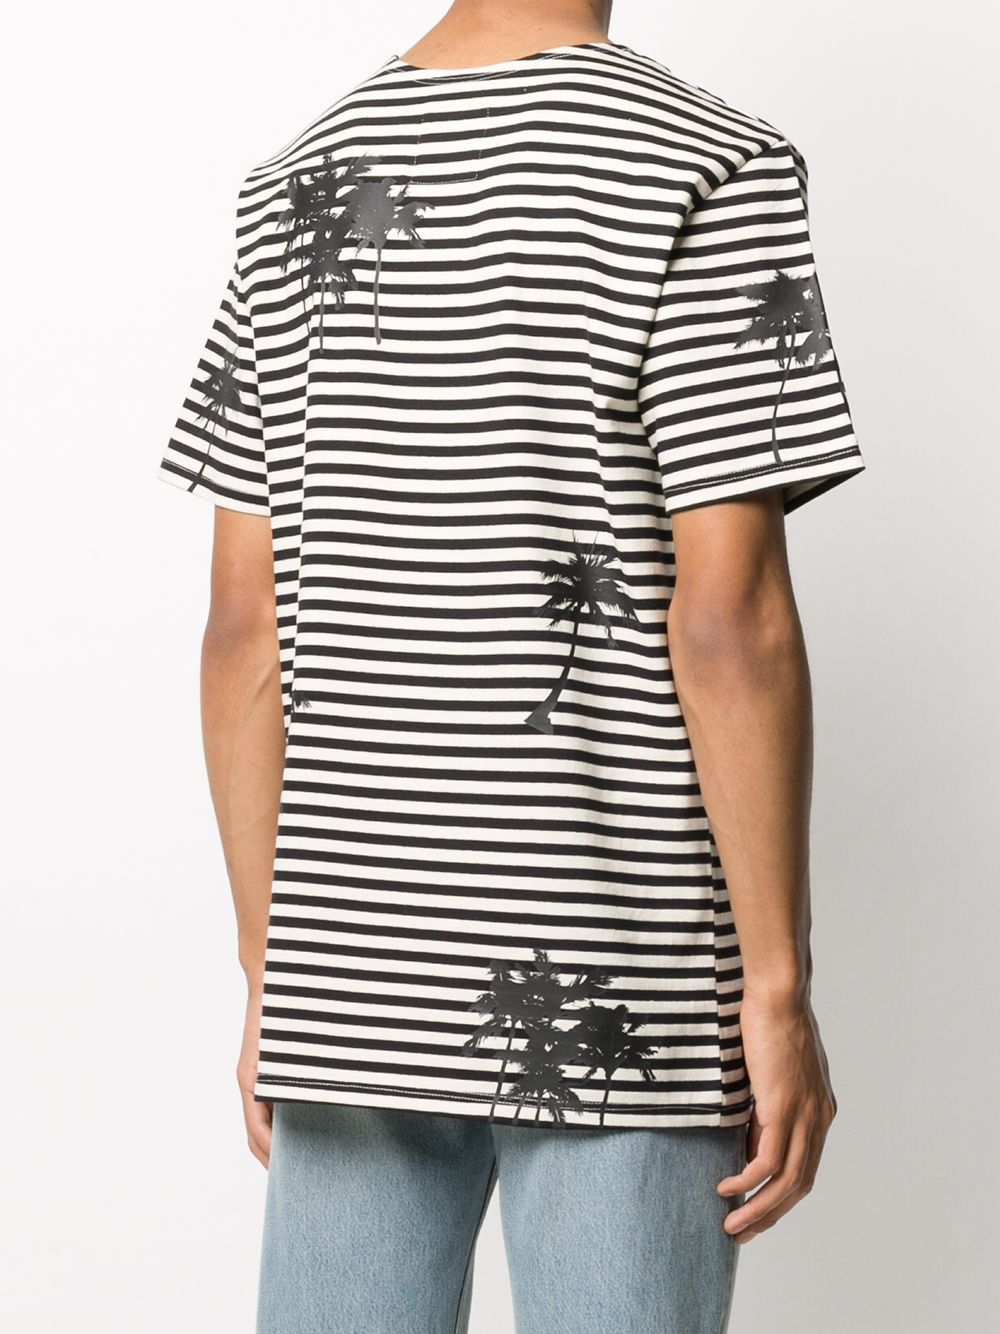 Shop Myar striped logo T-shirt with Express Delivery - FARFETCH